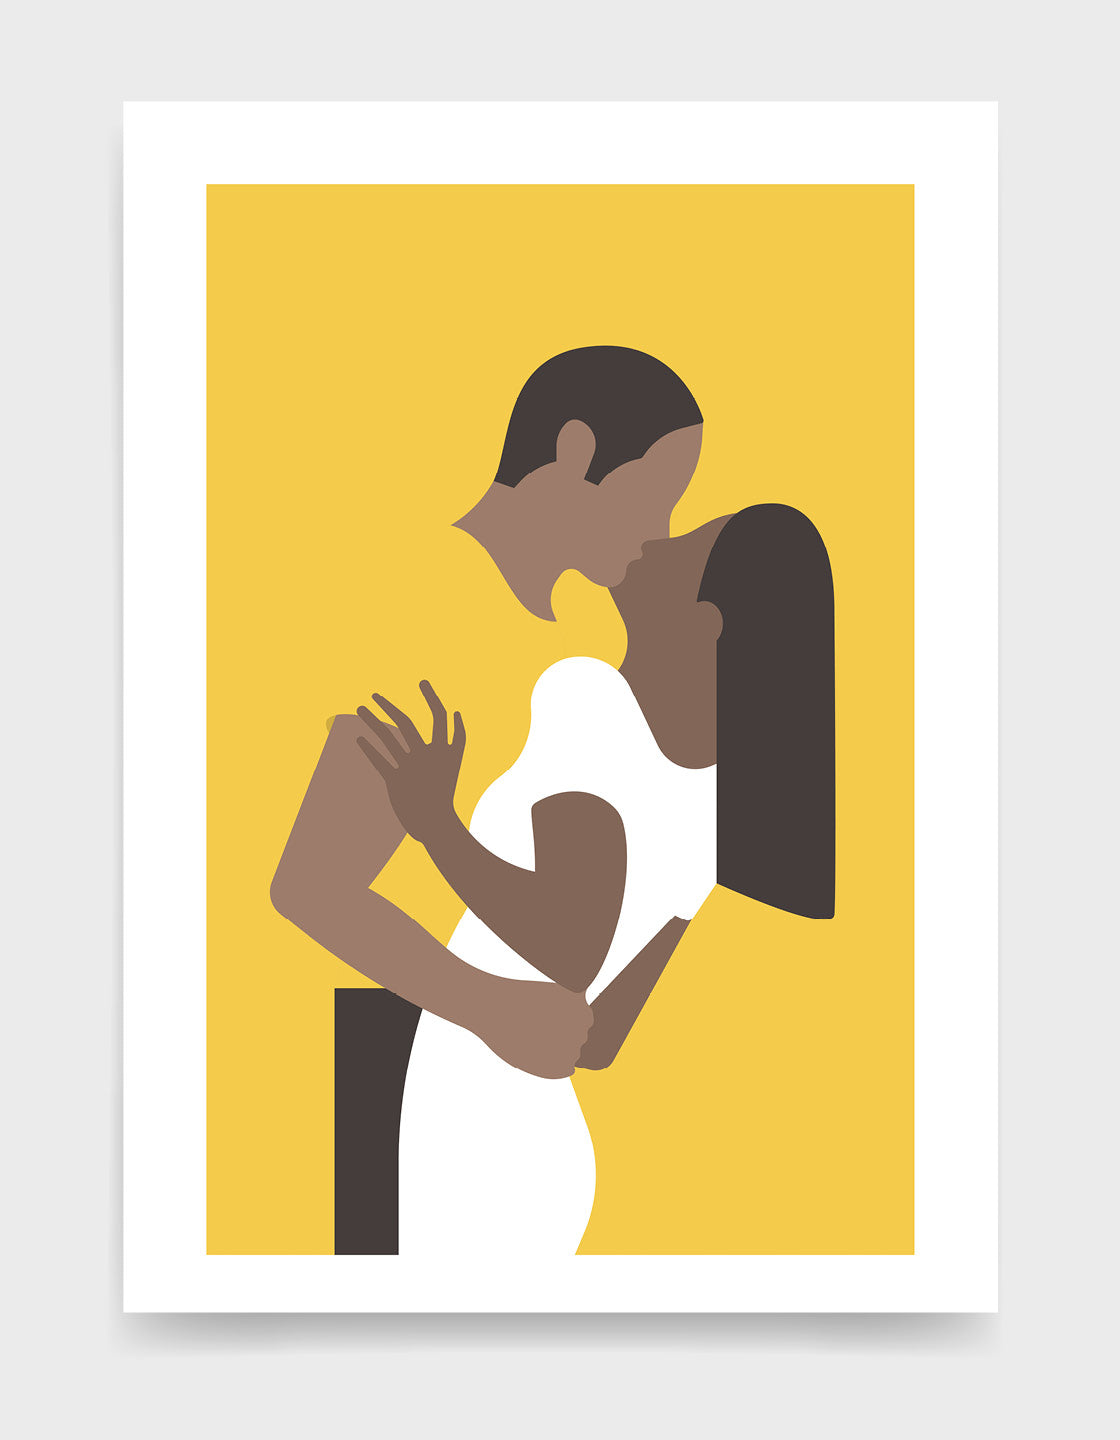 Yellow poster print depicts a couple in an embrace kissing. The woman is on the right wearing a white dress and the man's yellow t-shirt blends with the background